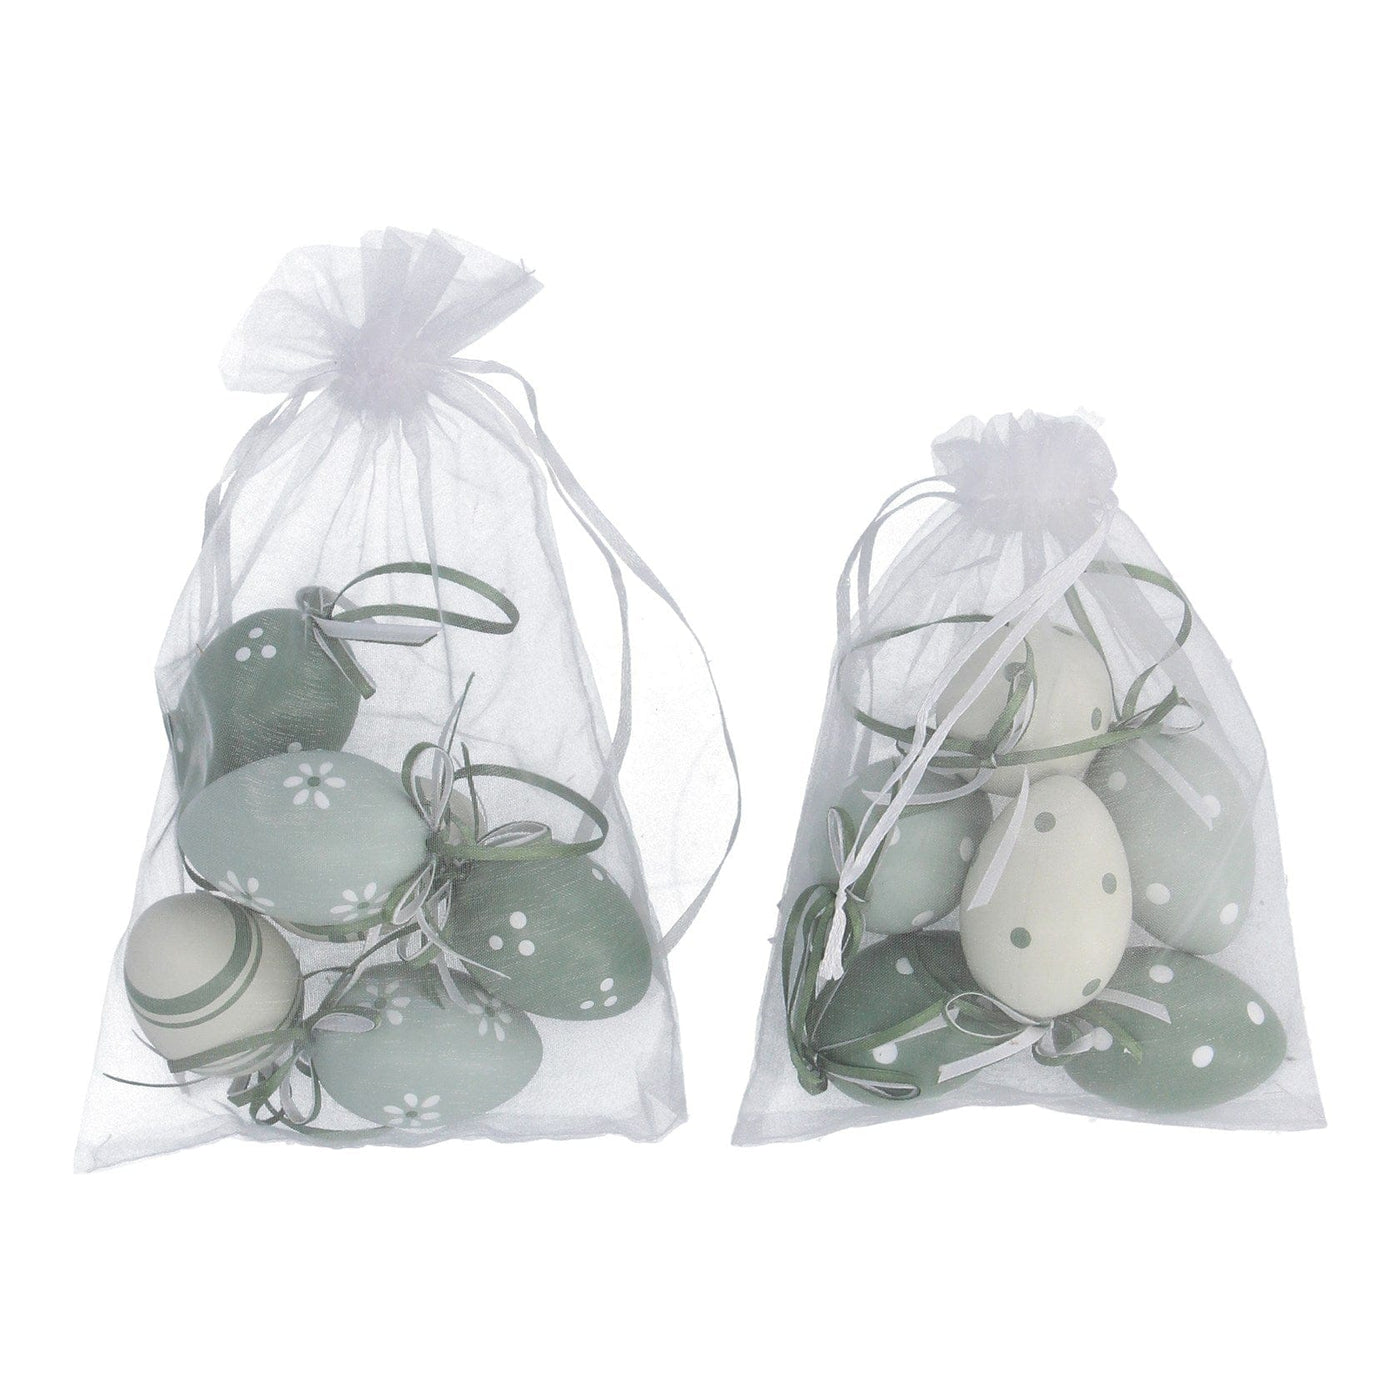 Gisela Graham Easter Easter Decorations 2 Bags of Green and White Easter Egg Decorations